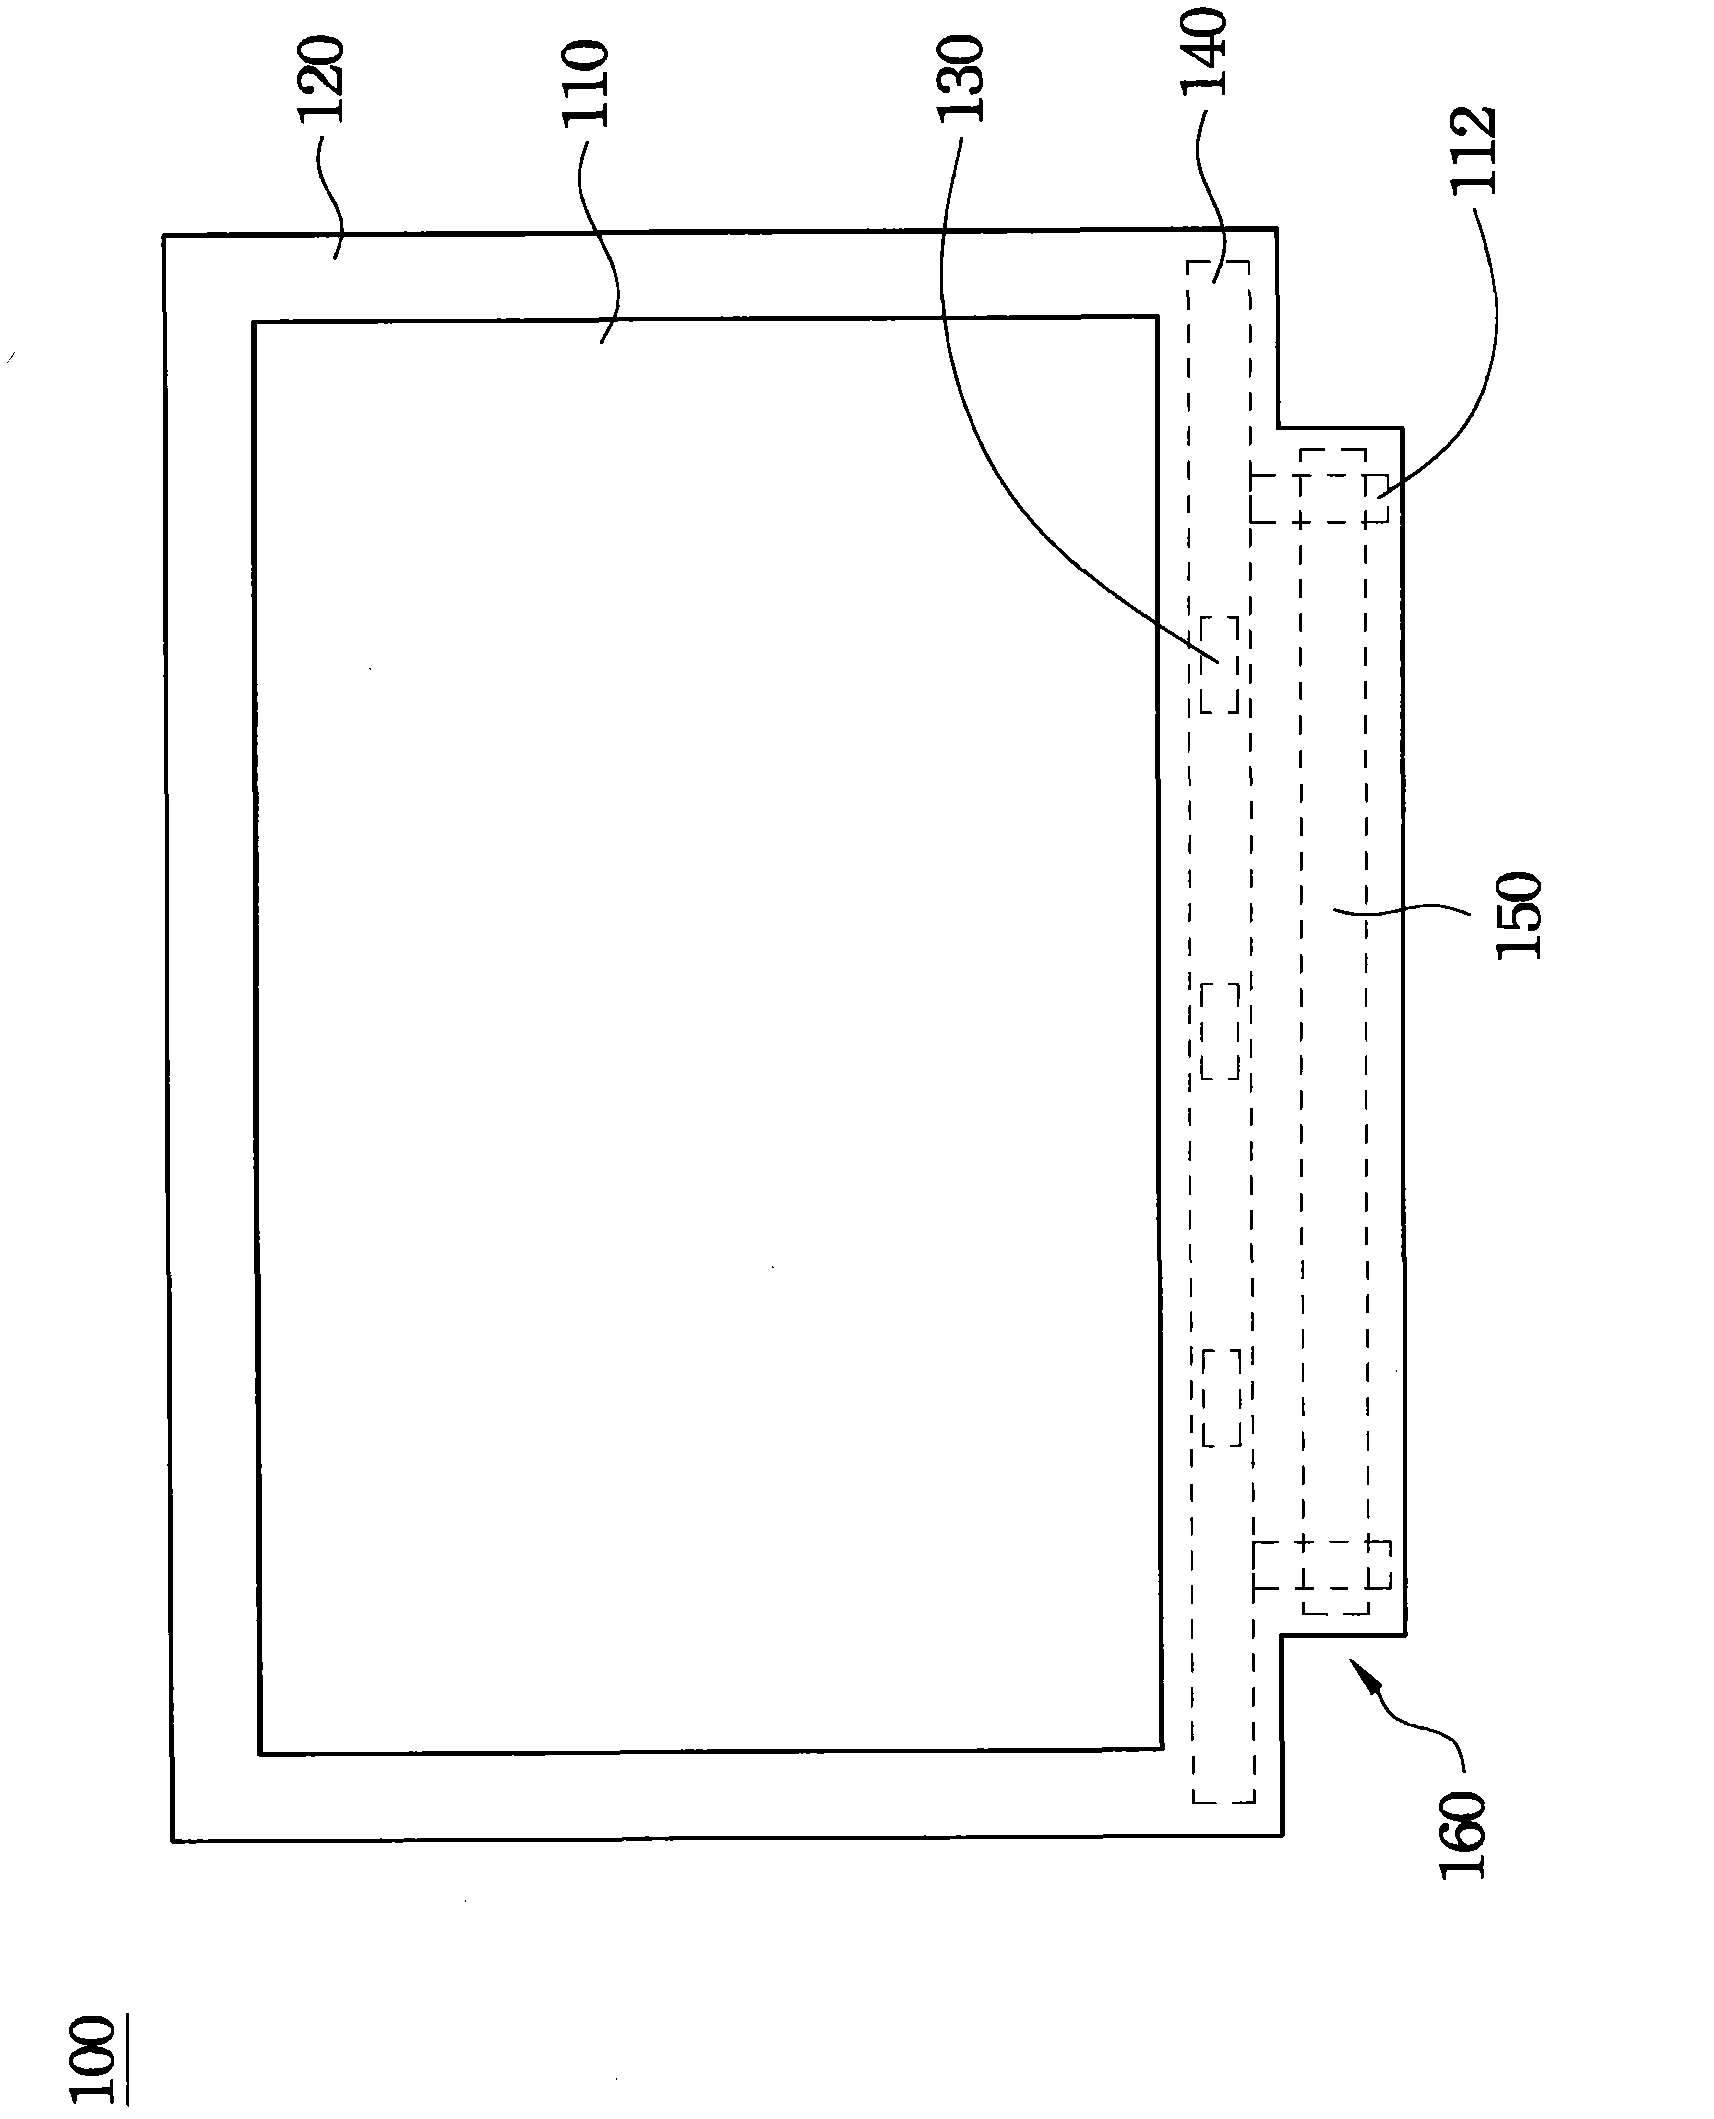 Display device and protective structure therefor